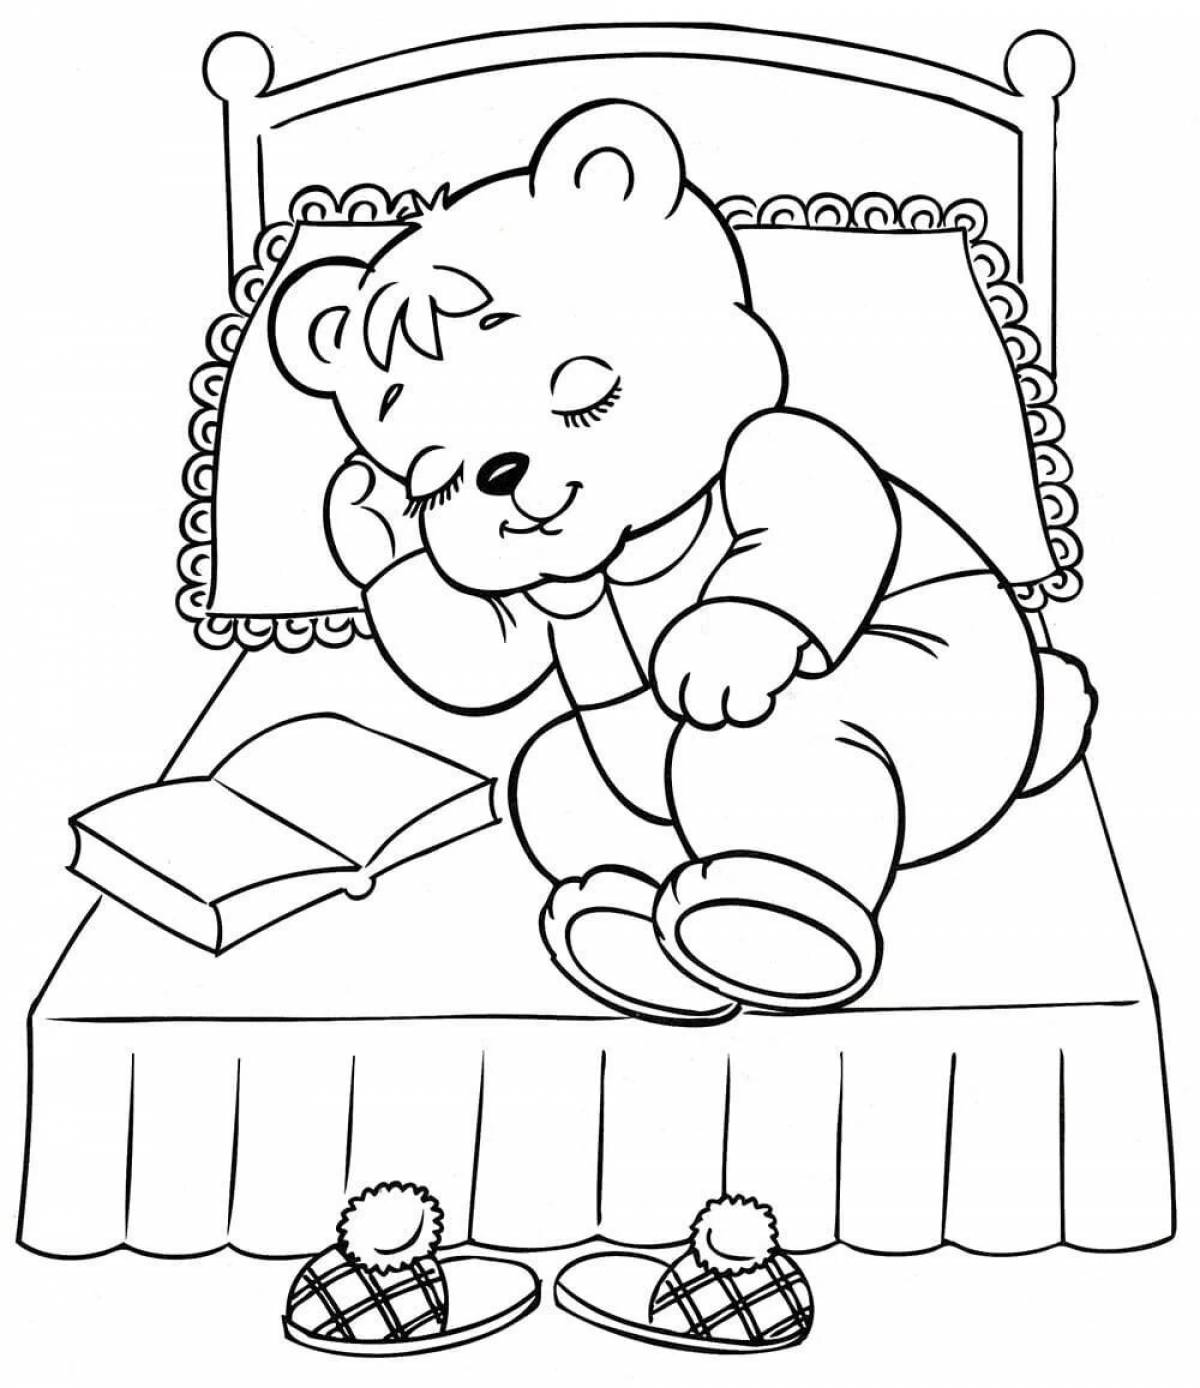 Humorous teddy bear coloring book for 5-6 year olds